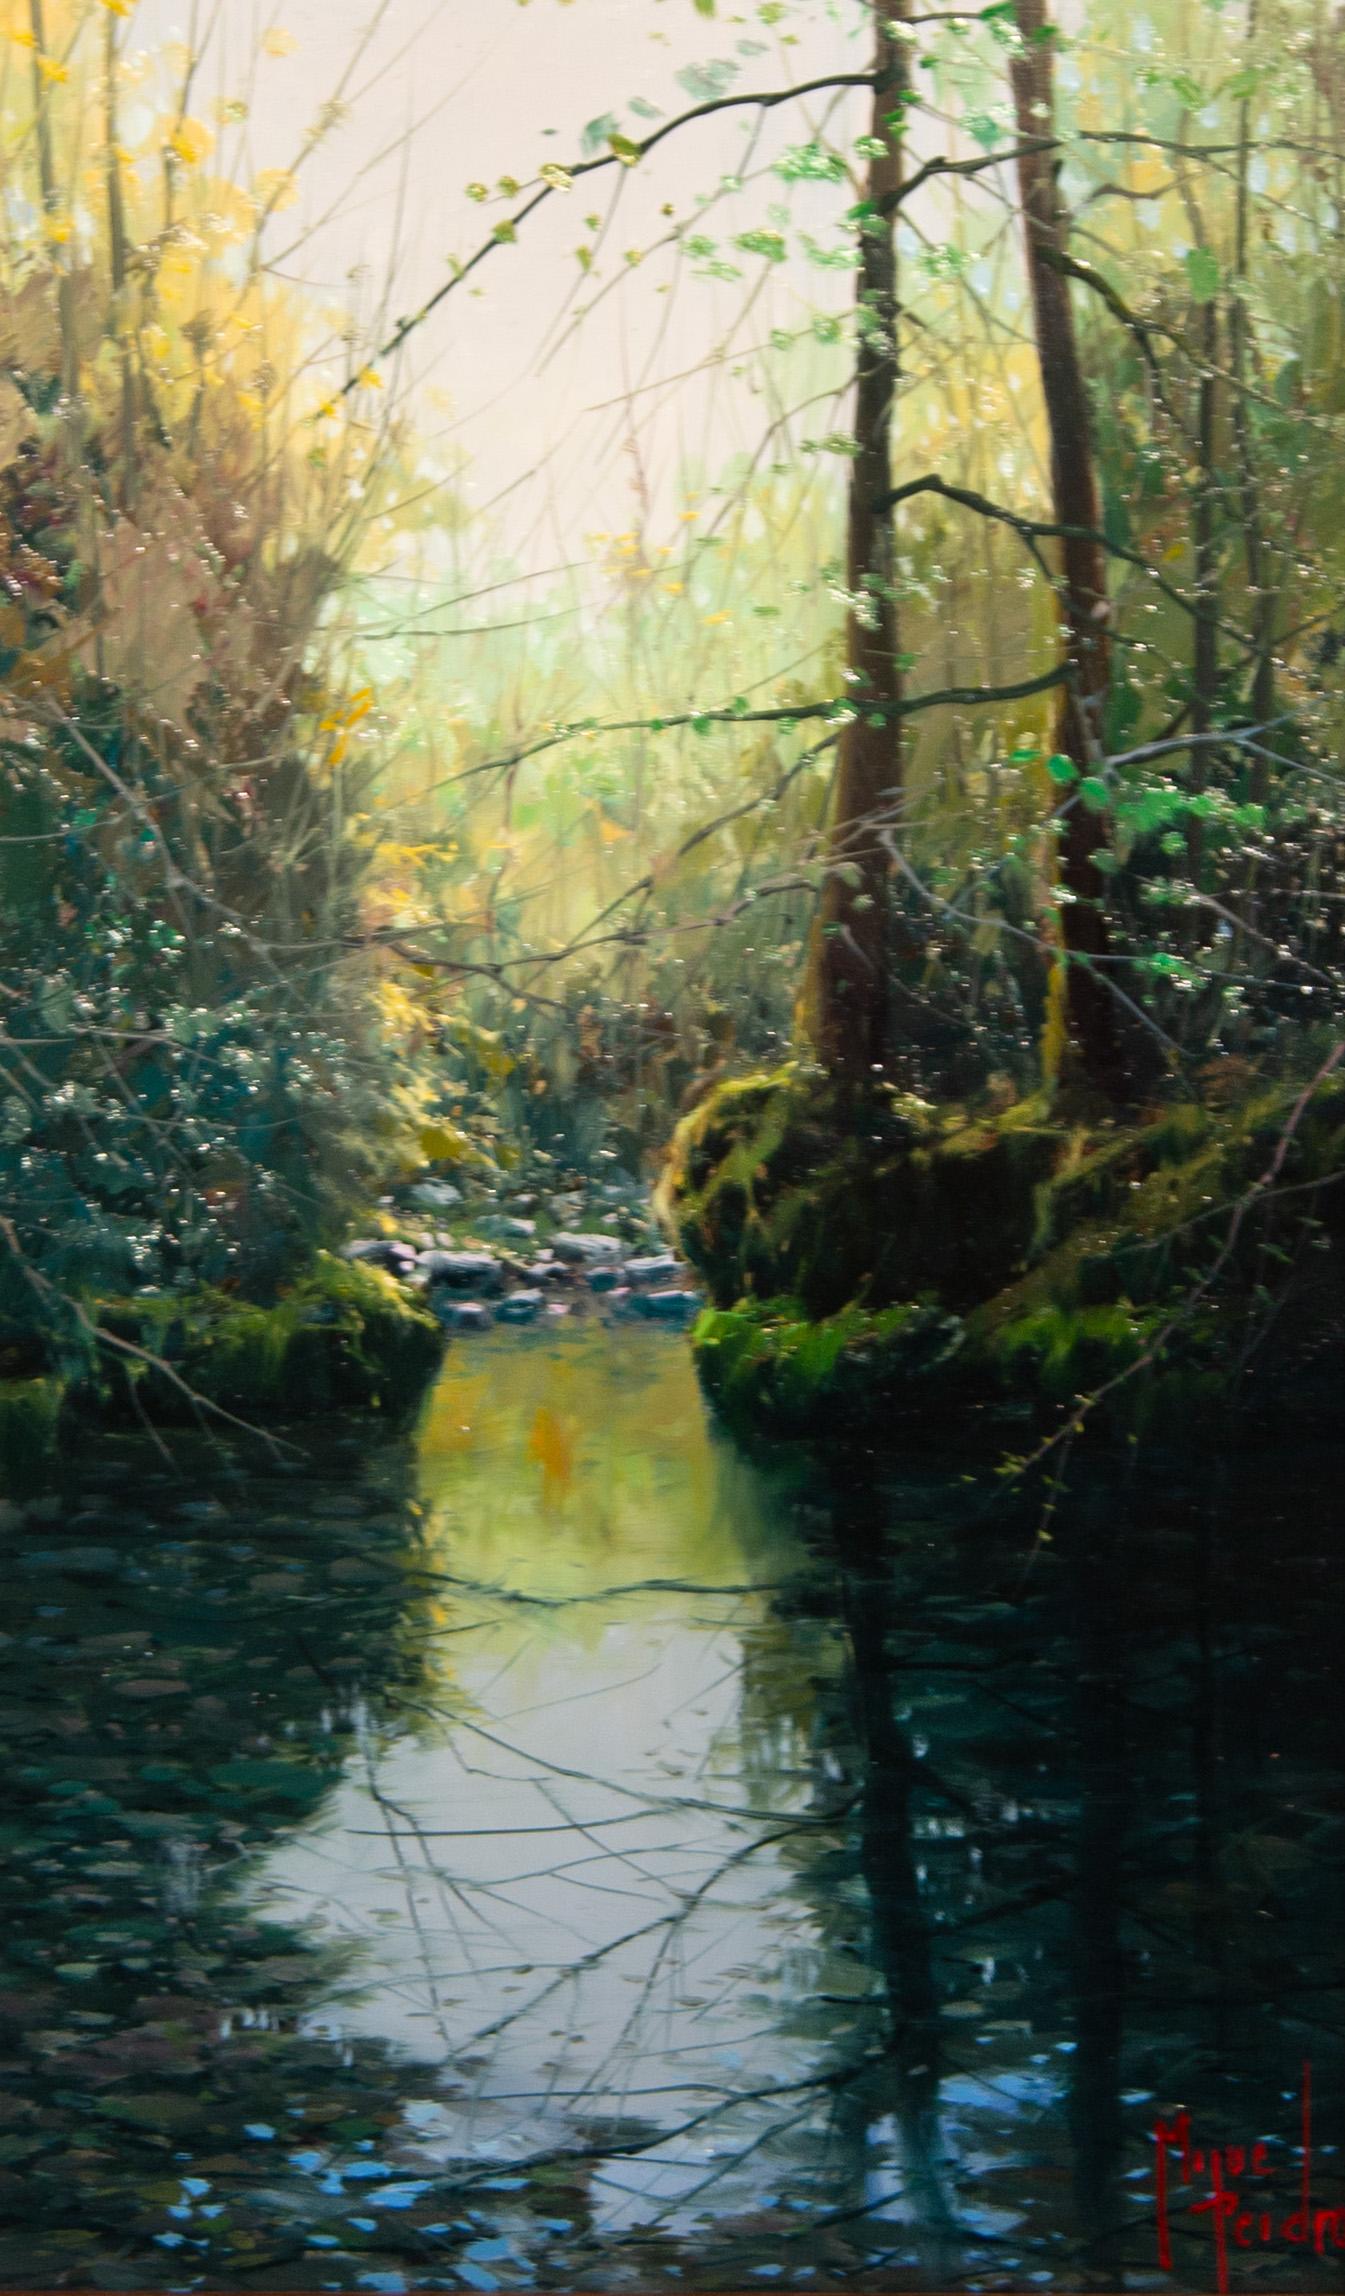 'Tranquility' contemporary photorealist painting of the woods, river, trees - Painting by Miguel Piedro